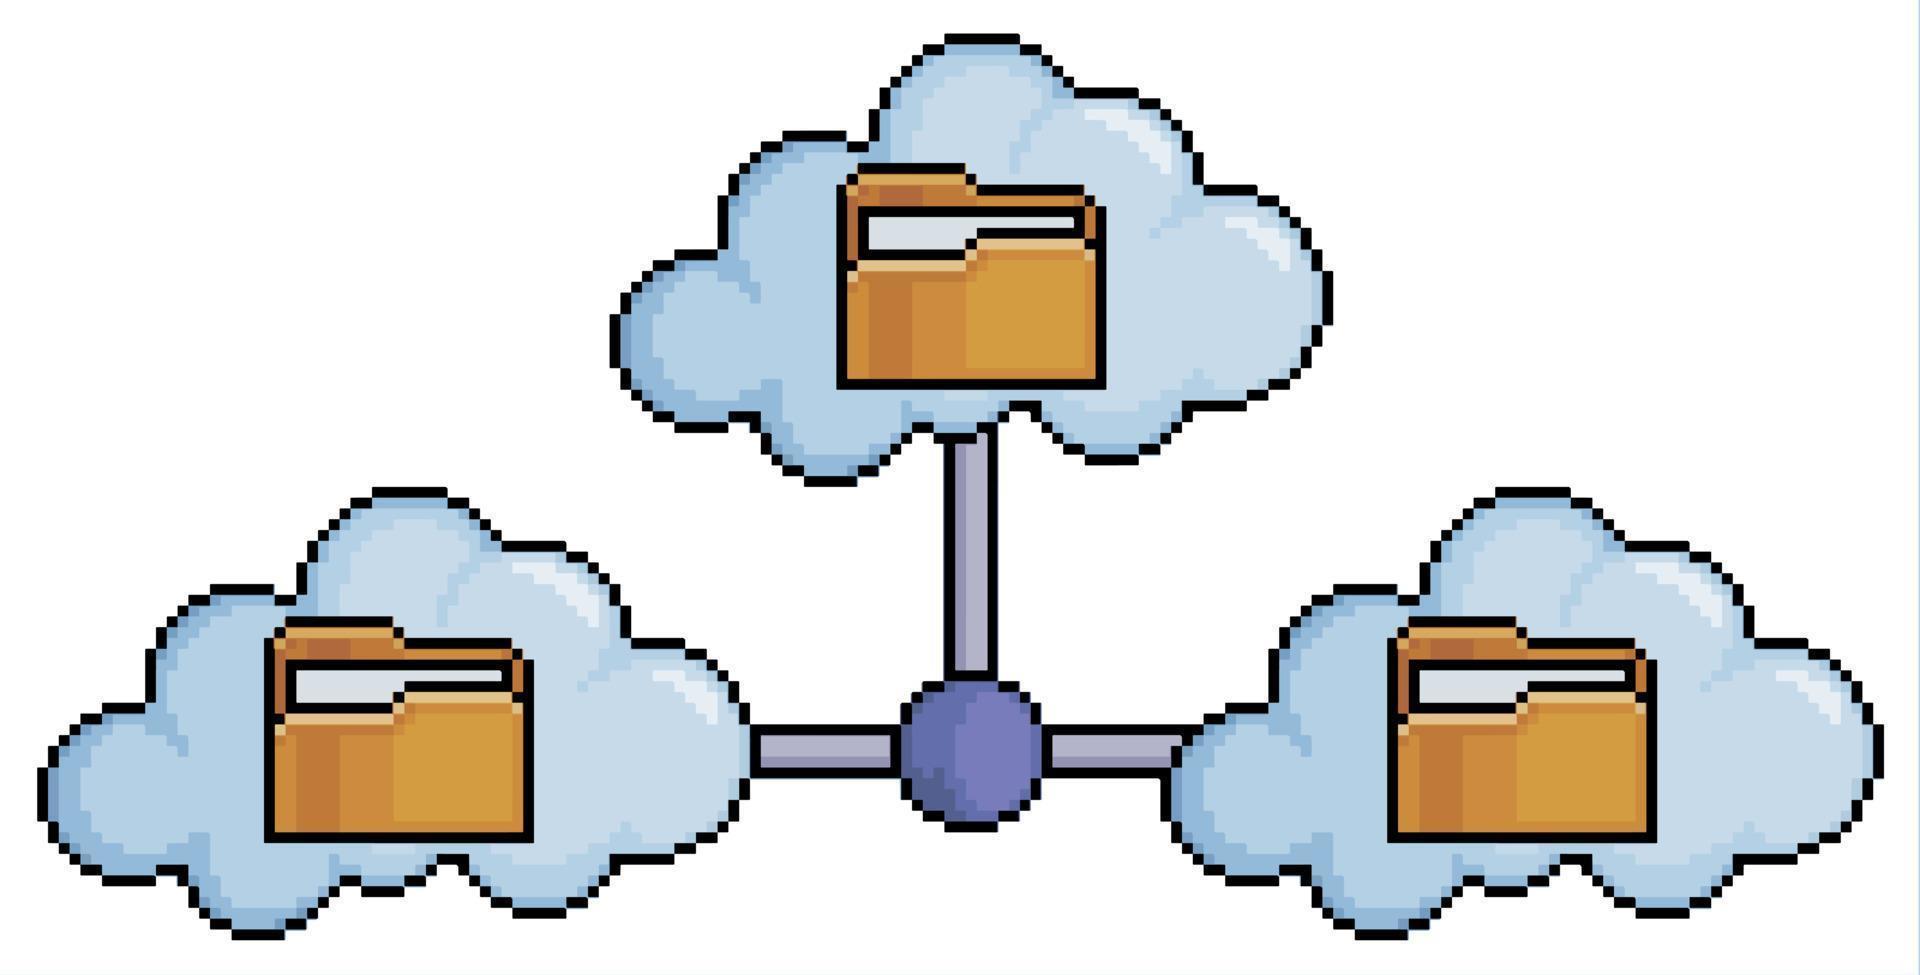 Pixel art cloud network, cloud files vector icon for 8bit game on white background